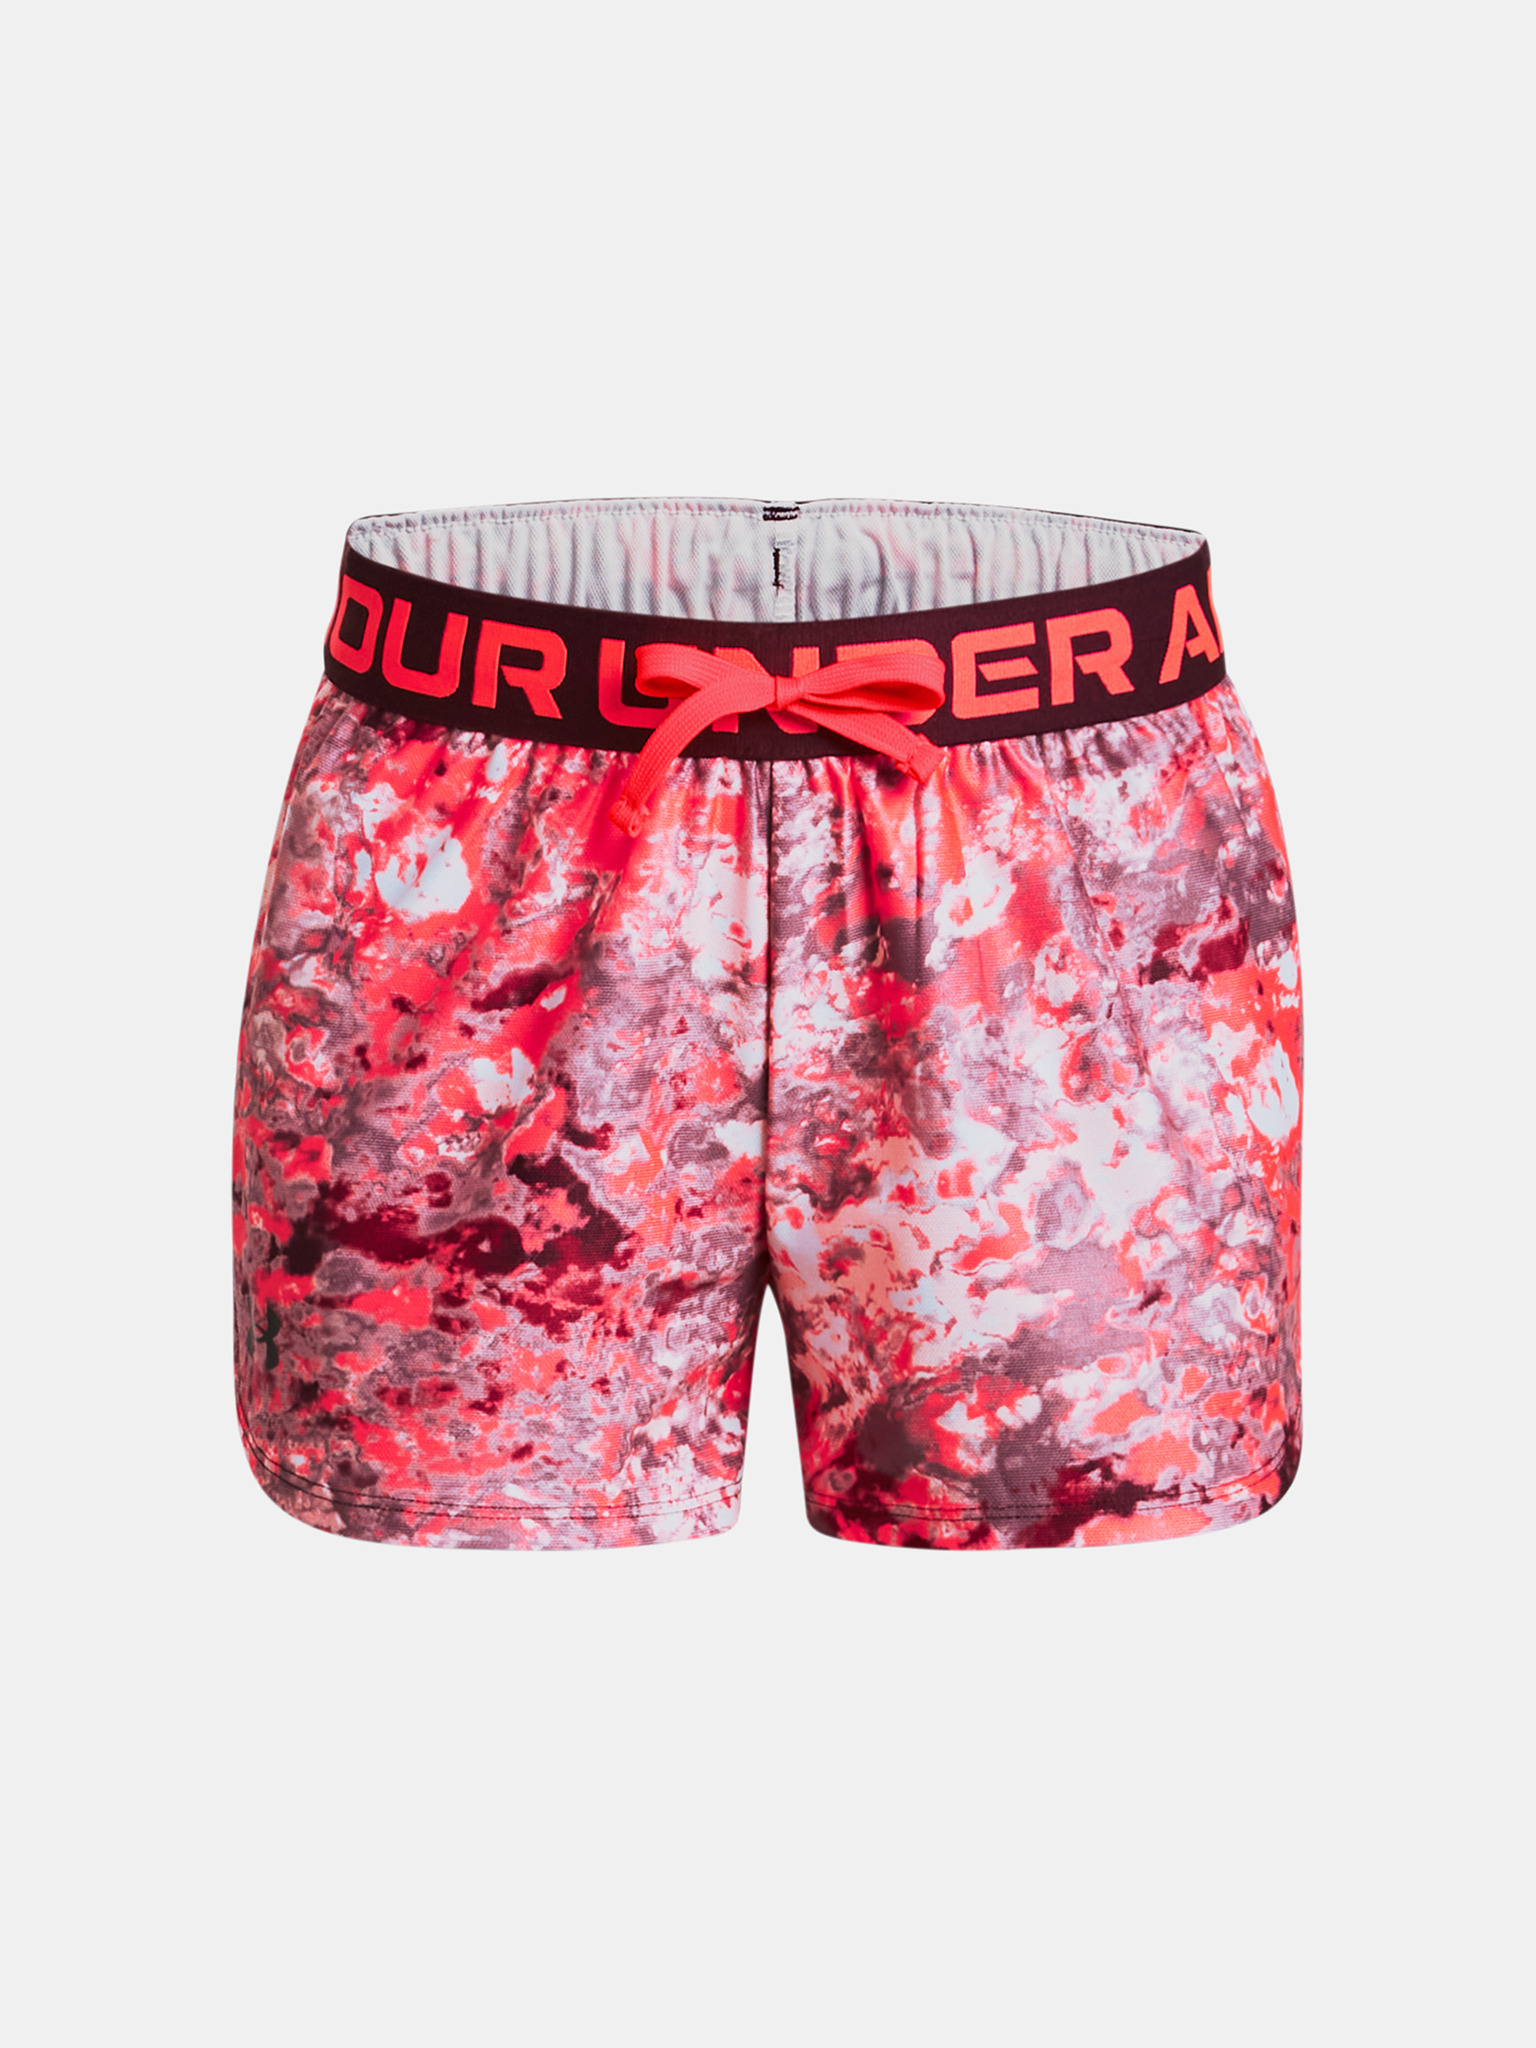 Under Armour, Shorts -  Canada